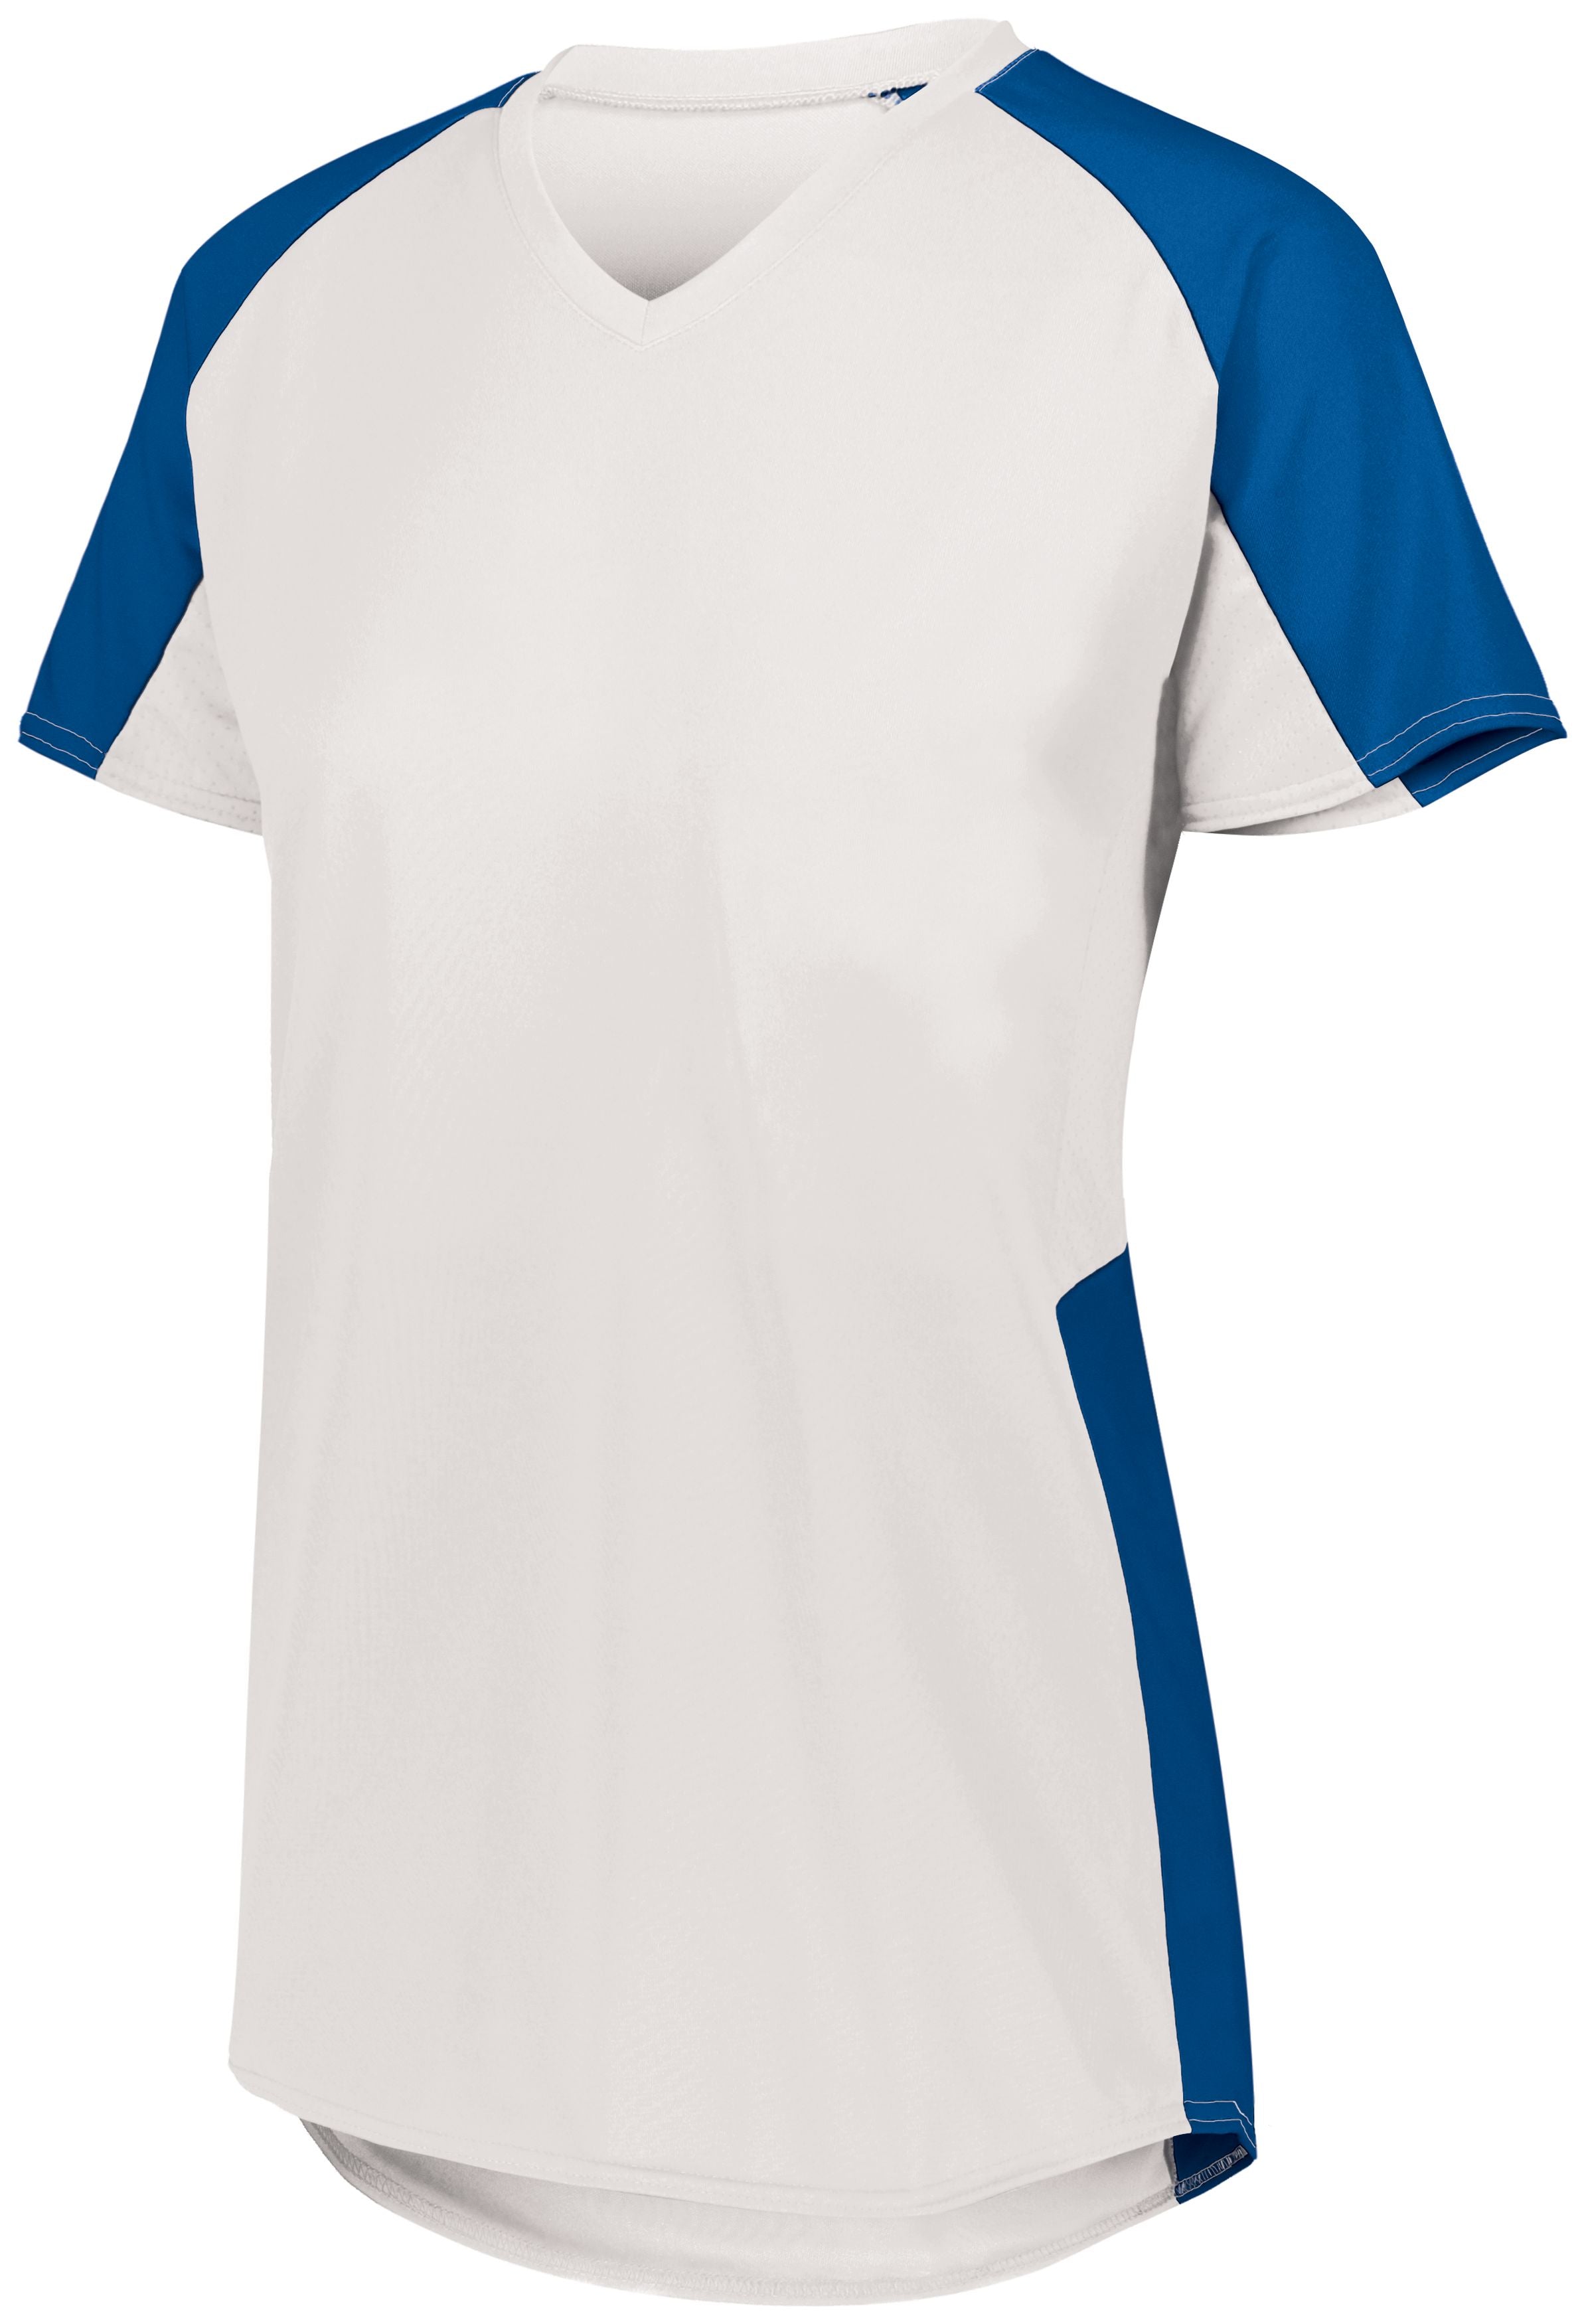 Augusta Sportswear Ladies Cutter Jersey in White/Royal  -Part of the Ladies, Ladies-Jersey, Augusta-Products, Softball, Shirts product lines at KanaleyCreations.com